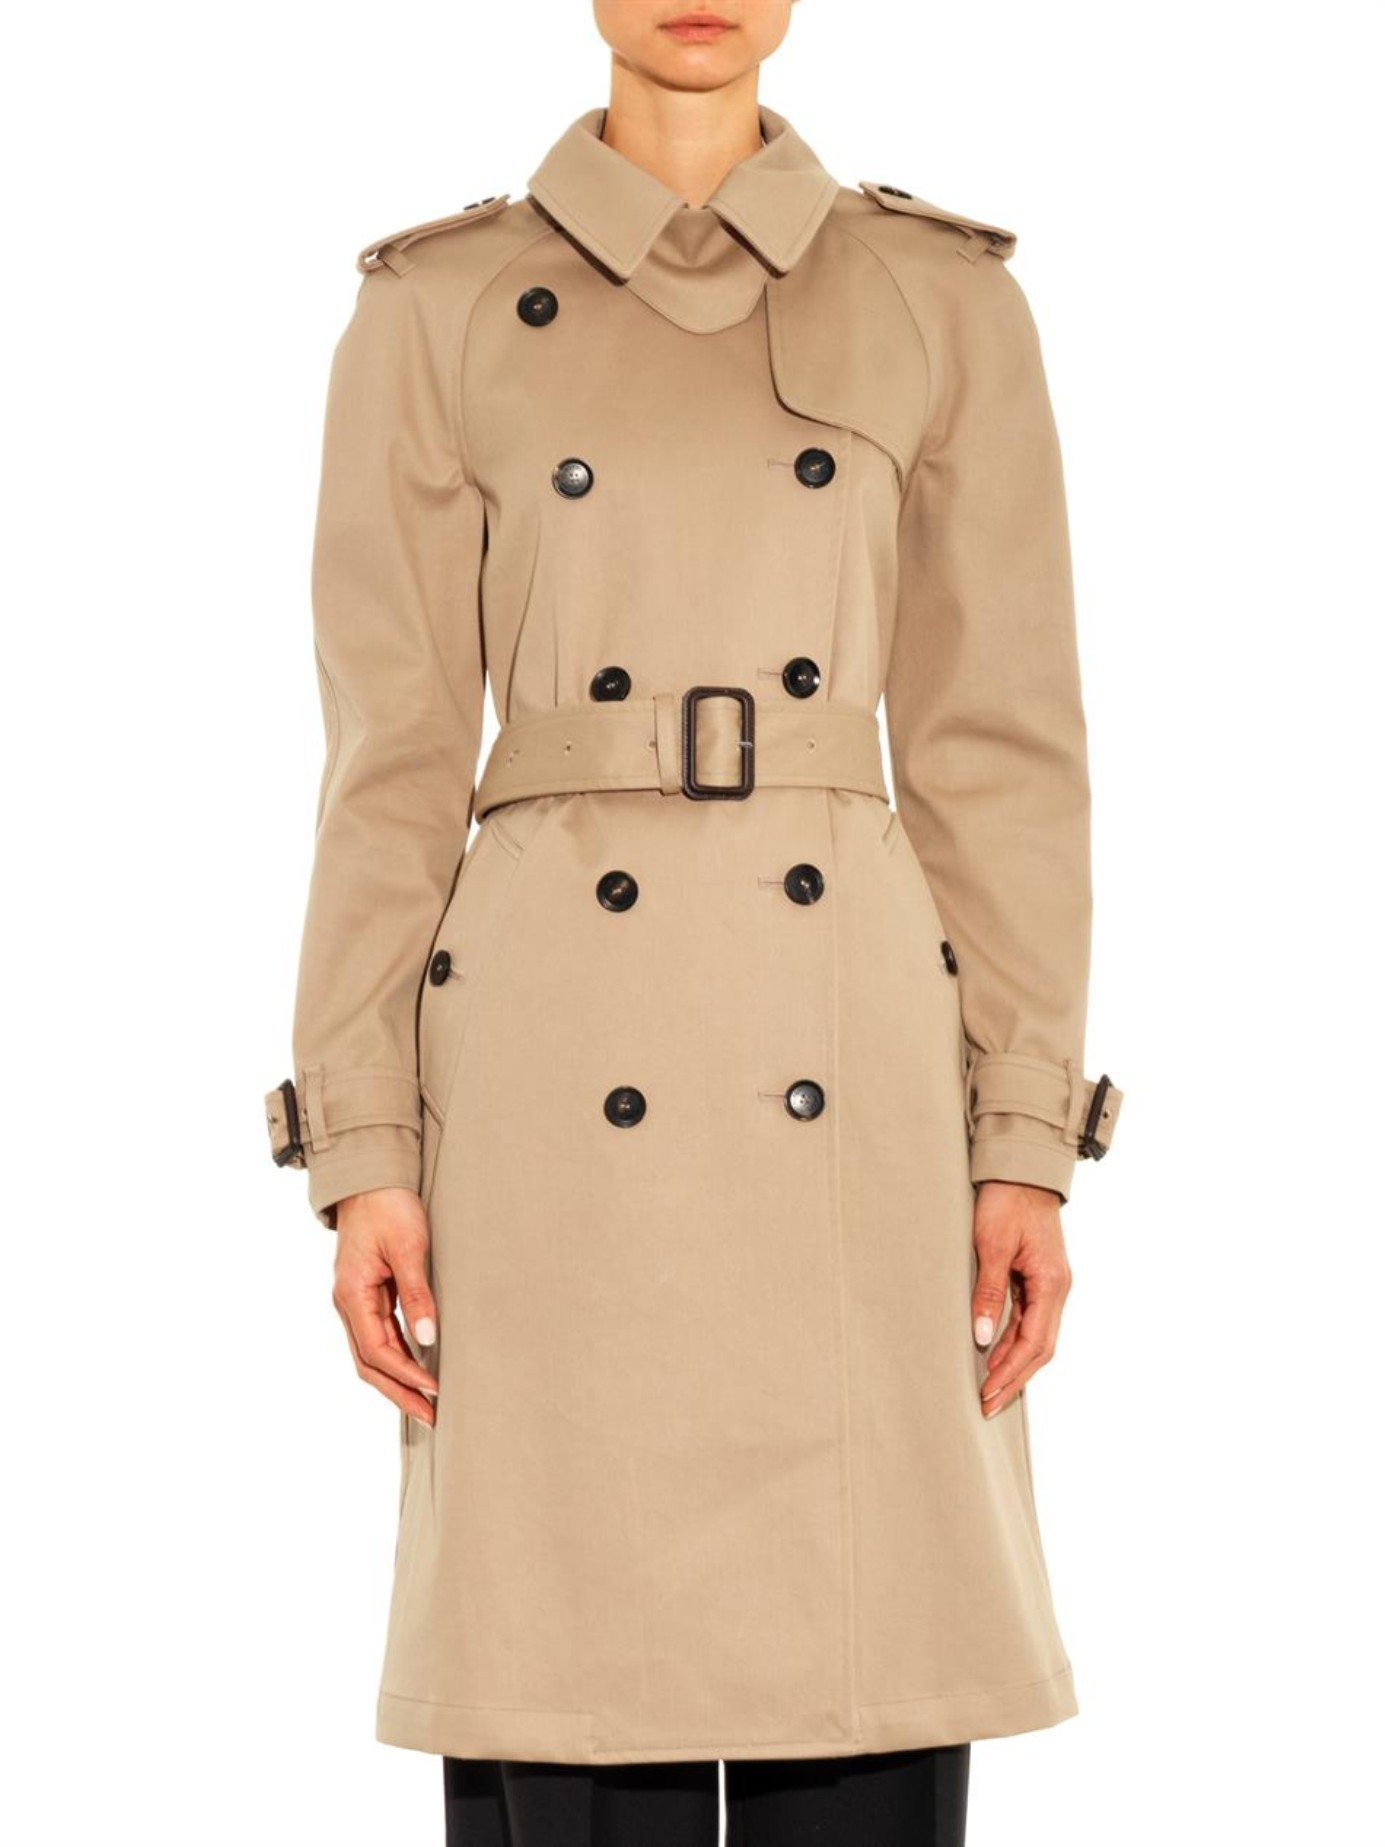 Gucci Classic Trench Coat in Tan (Brown) - Lyst